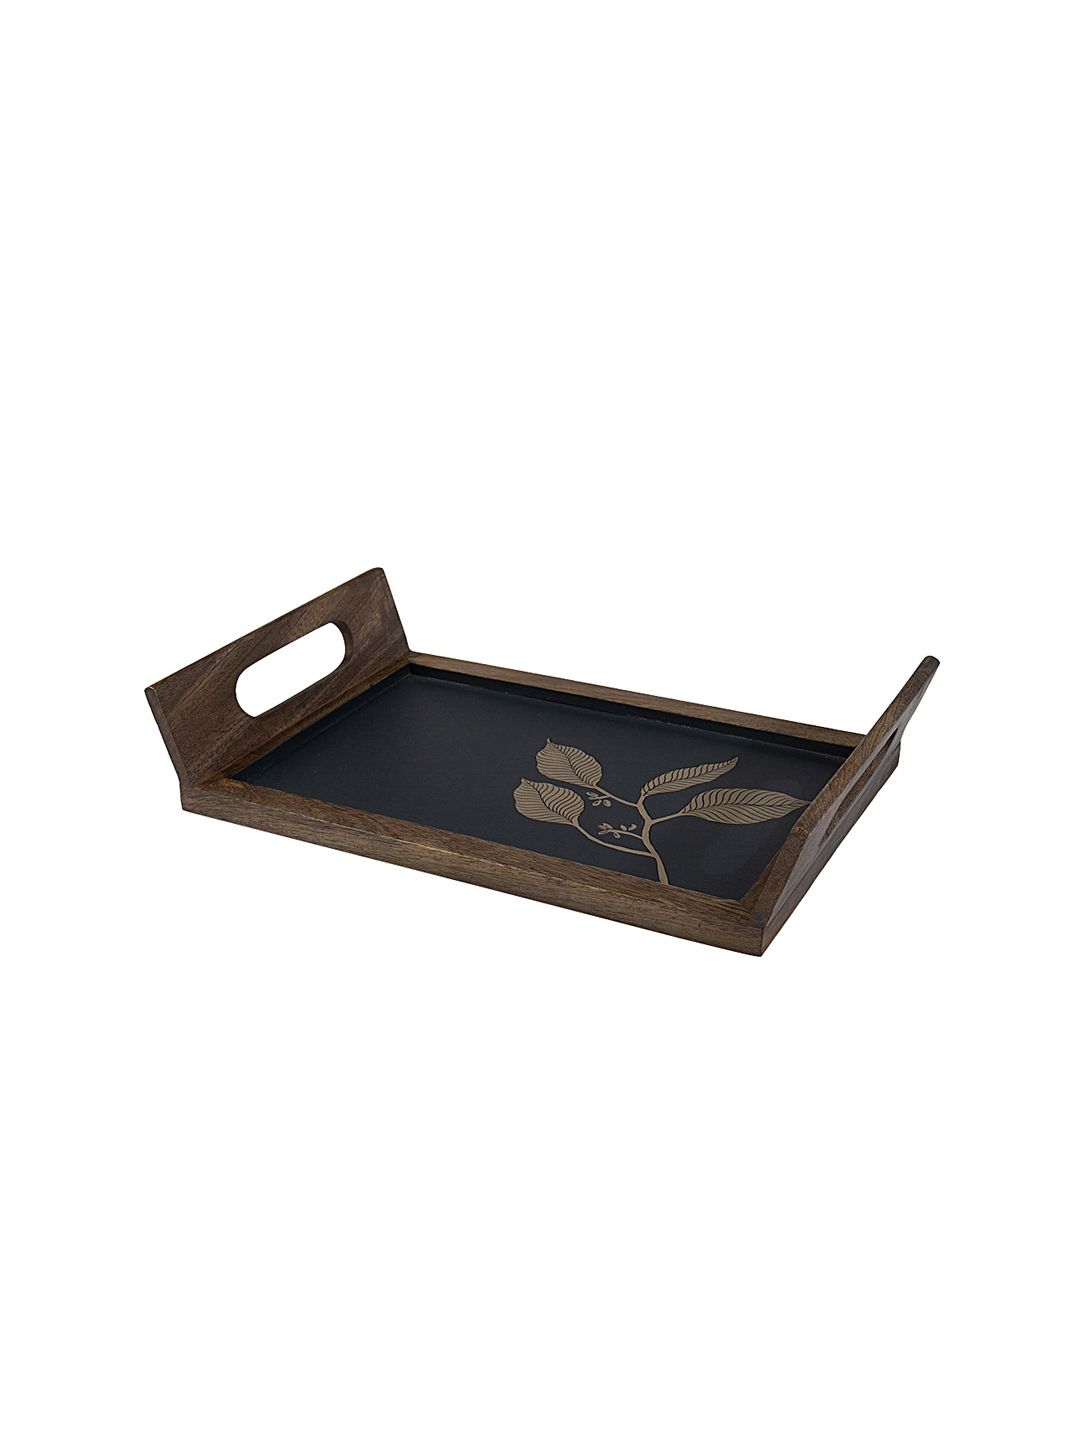 ellementry Black & Brown Hand Painted Wooden Tray Price in India